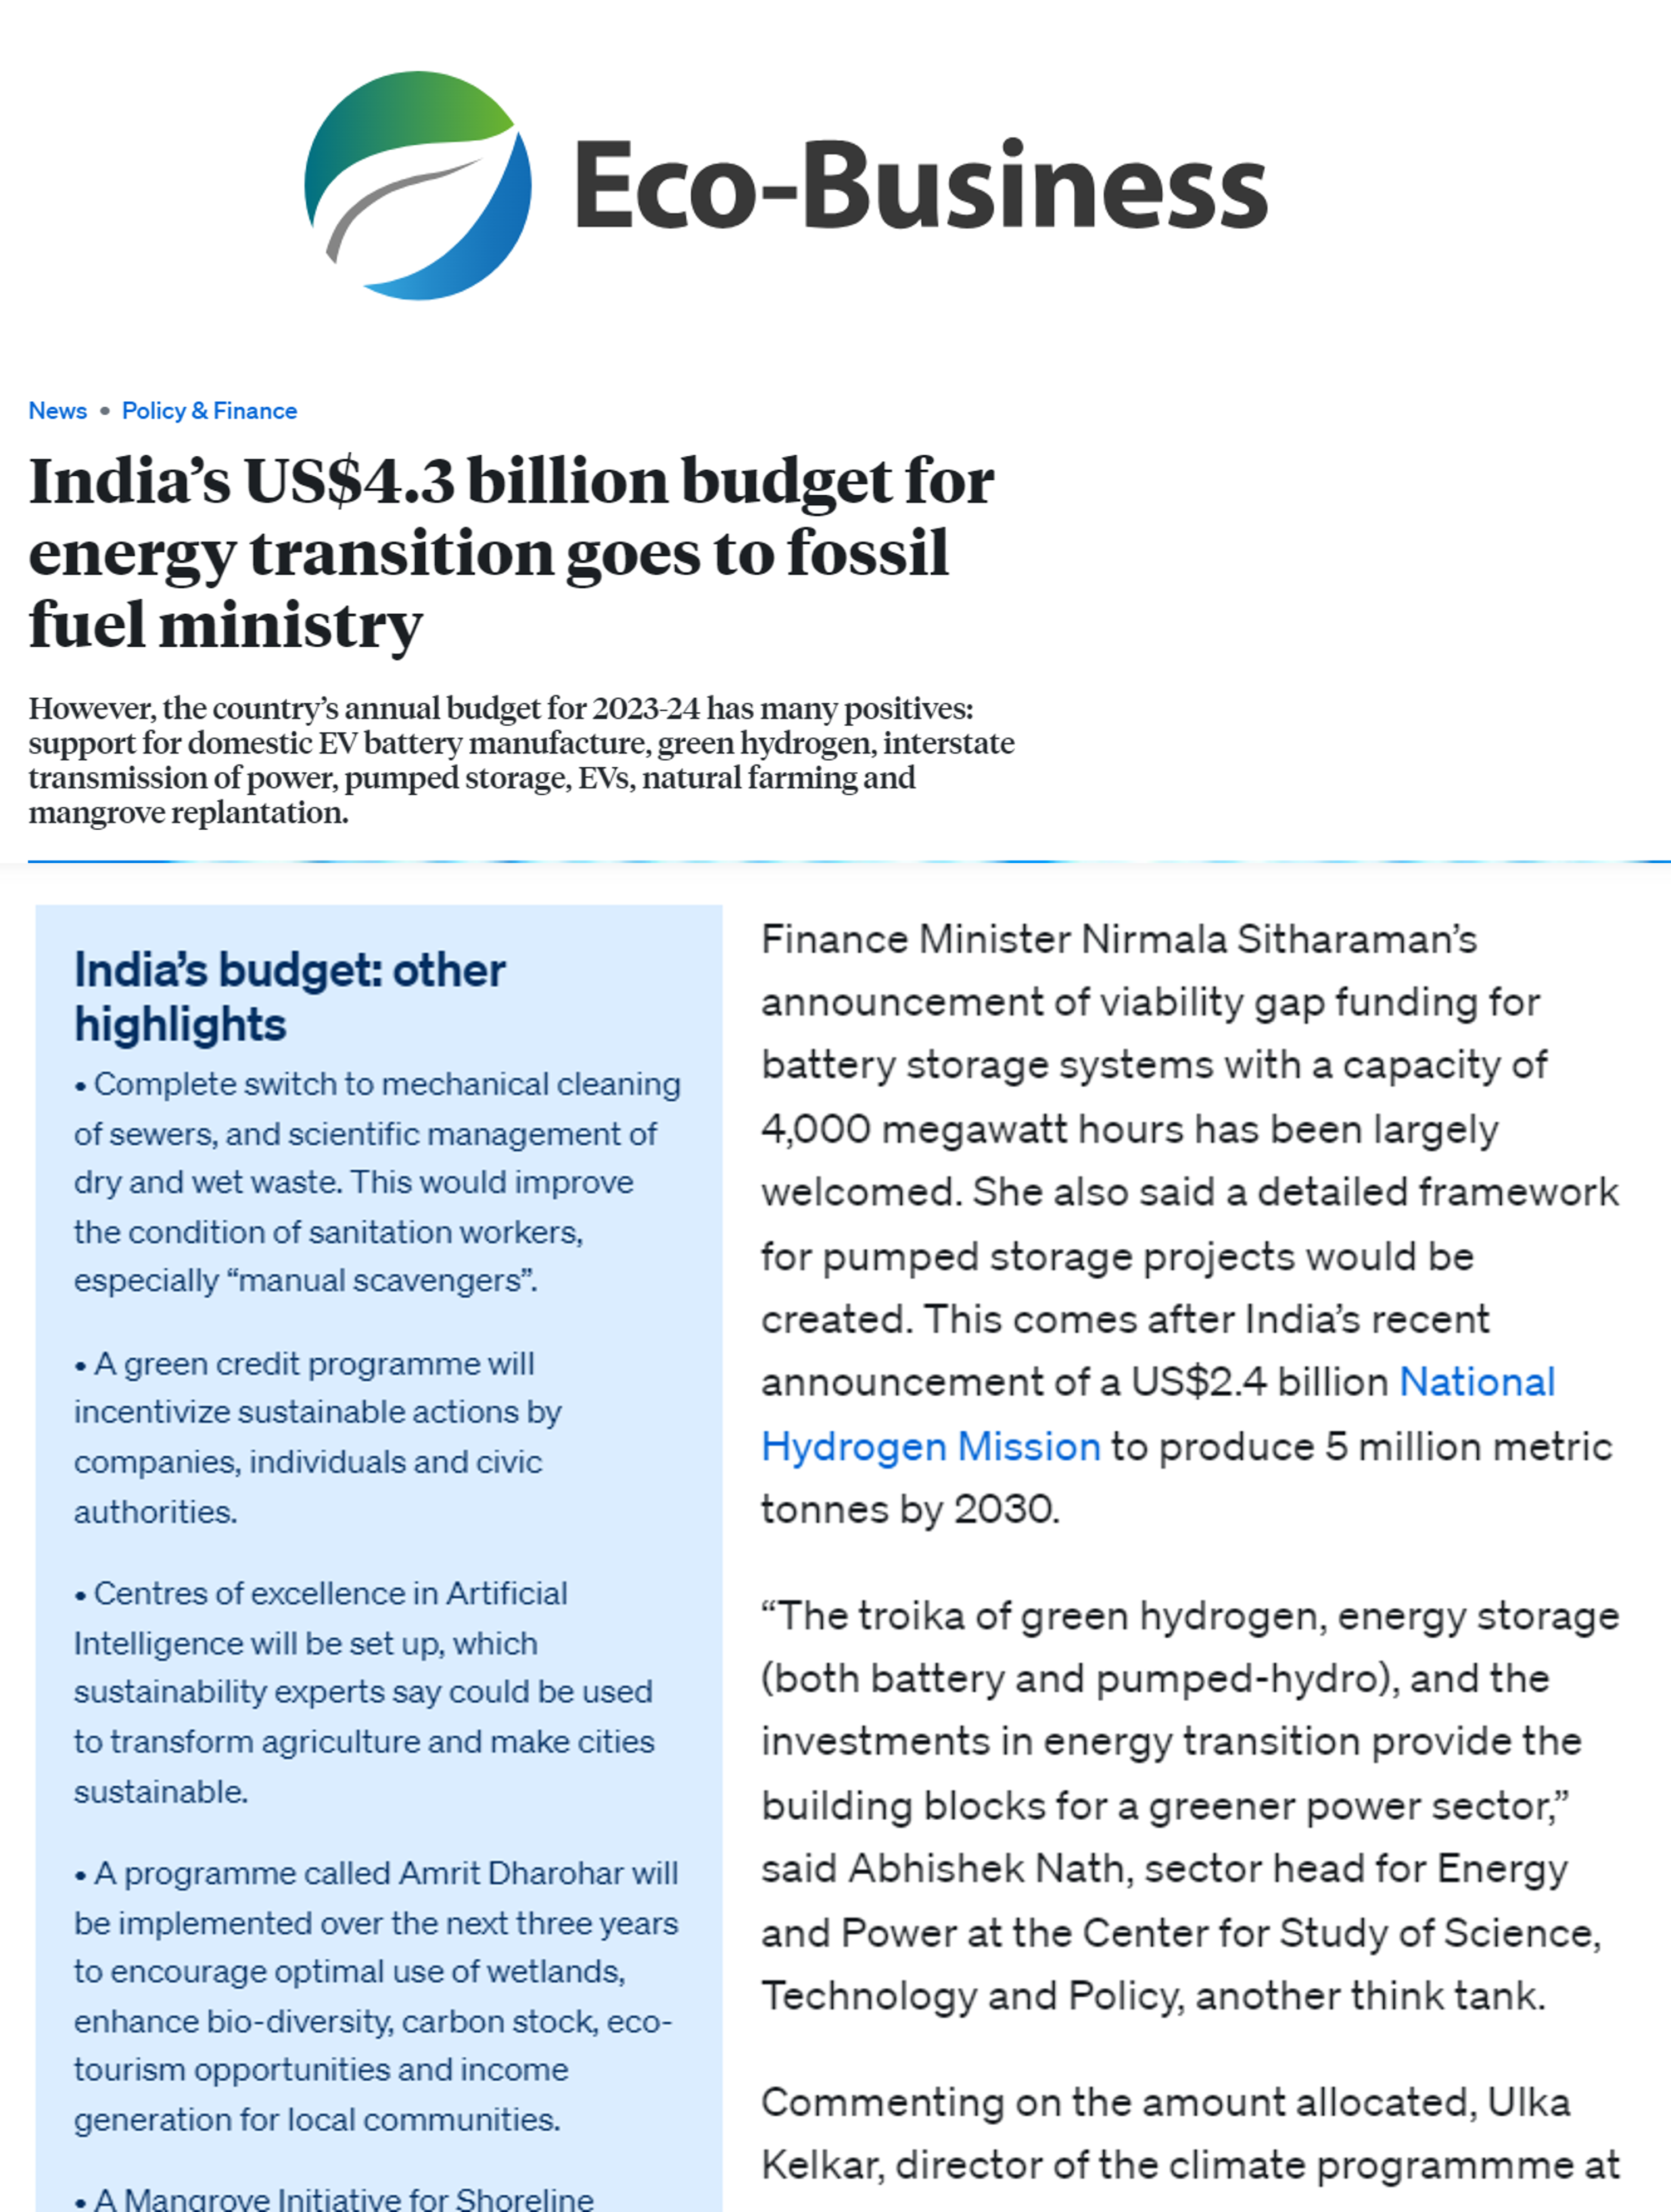 Abhishek Nath quoted by Eco-Business on the union budget announcements for a greener power sector